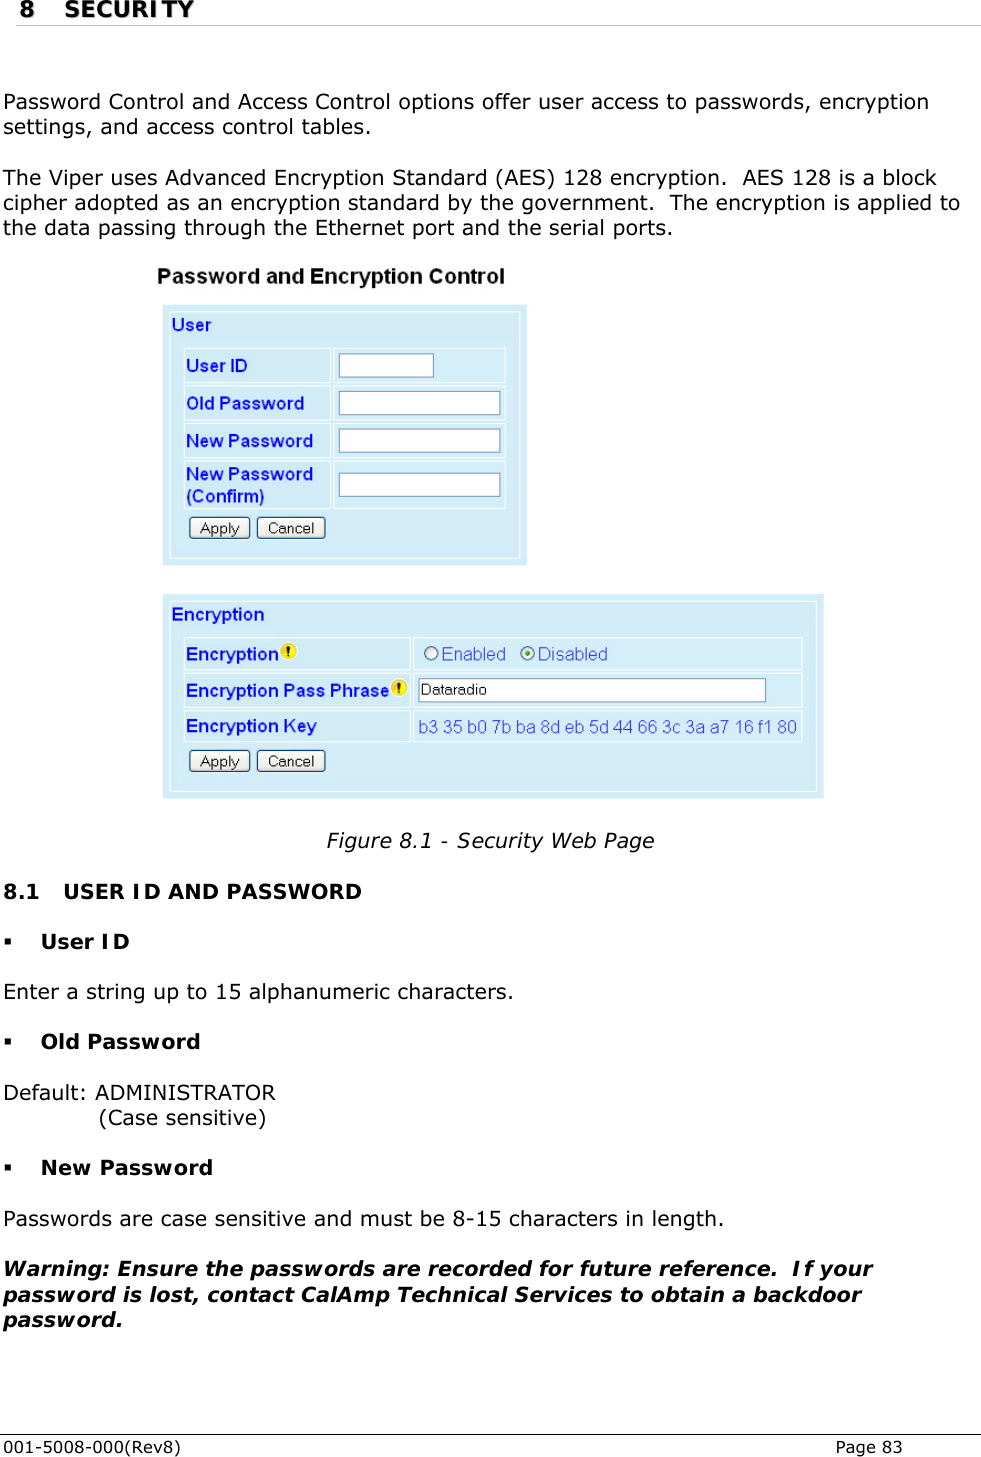  001-5008-000(Rev8)   Page 83 88  SSEECCUURRIITTYY   Password Control and Access Control options offer user access to passwords, encryptiosettings, and access control tables.   n he Viper uses Advanced Encryption Standard (AES) 128 encryption.  AES 128 is a block d to Tcipher adopted as an encryption standard by the government.  The encryption is appliethe data passing through the Ethernet port and the serial ports.   Figure 8.1 - Security Web Page .1 USER ID AND PASSWORD  User ID Enter a string up to 15 alphanumeric characters.   Old Password Default: ADMINISTRATOR              (Case sensitive)  New Password Passwords are case sensitive and must be 8-15 characters in length.   Warning: Ensure the passwords are recorded for future reference.  If your password is lost, contact CalAmp Technical Services to obtain a backdoor password.   8